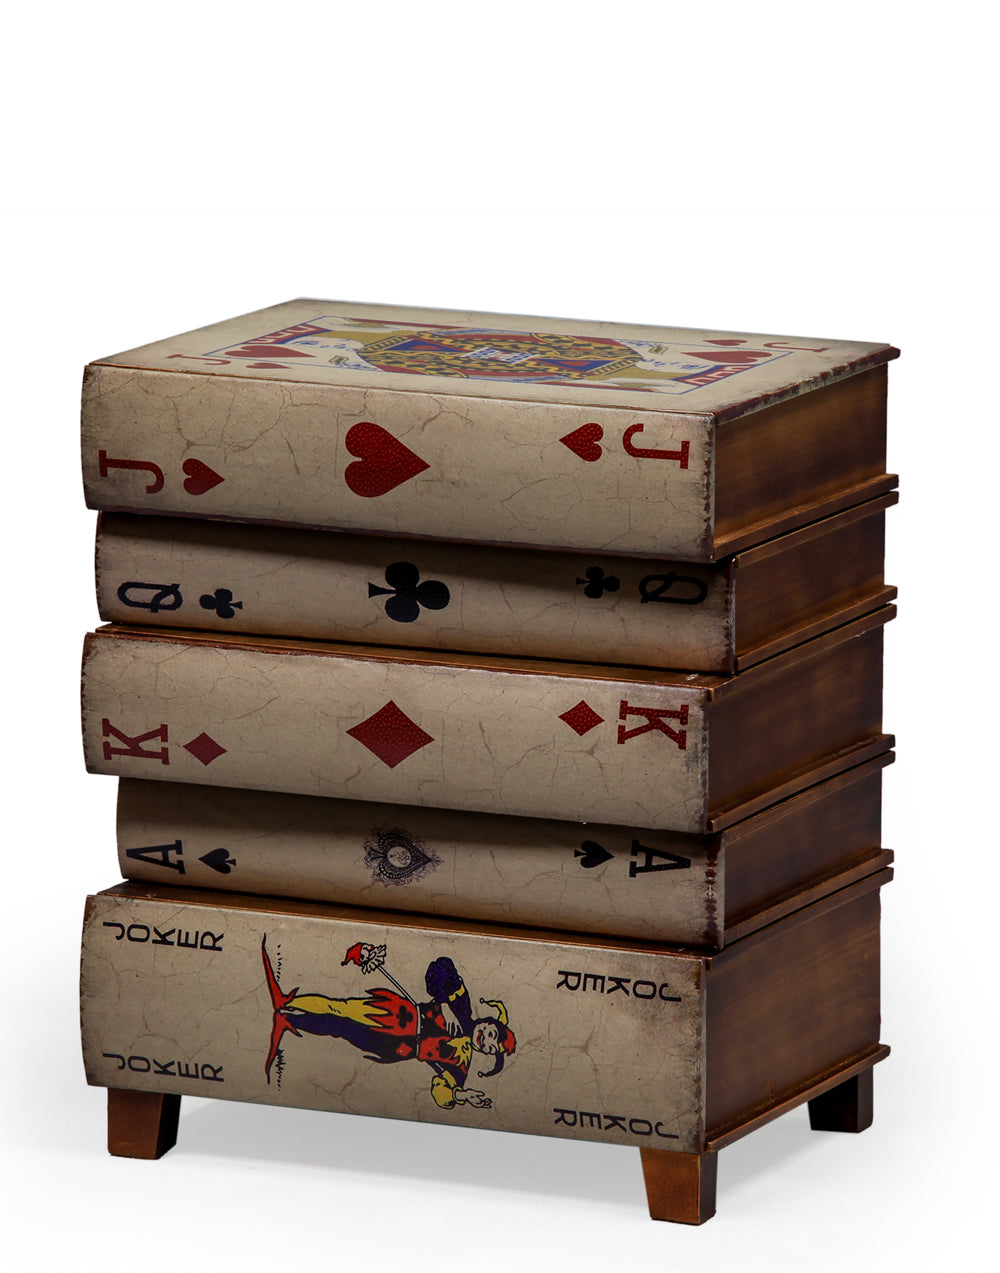 Antiqued Stacked Playing Cards Chest of Drawers - Unique Vintage-Style Storage